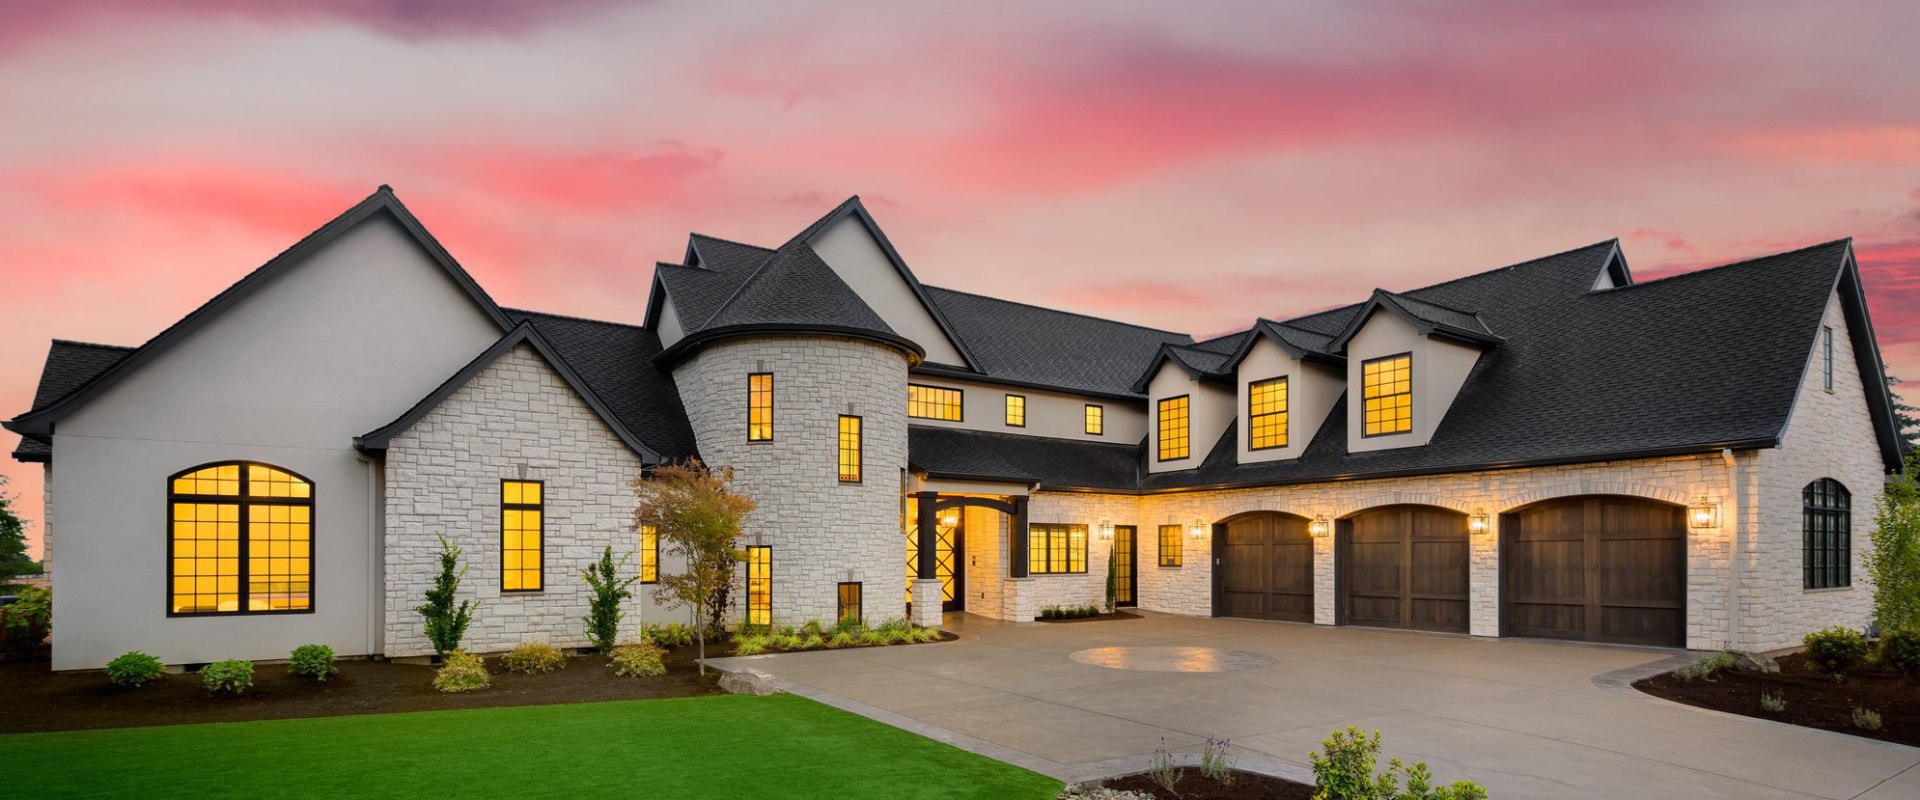 Sourcing Materials and Hiring Subcontractors for Your Custom Home: A Step-by-Step Guide